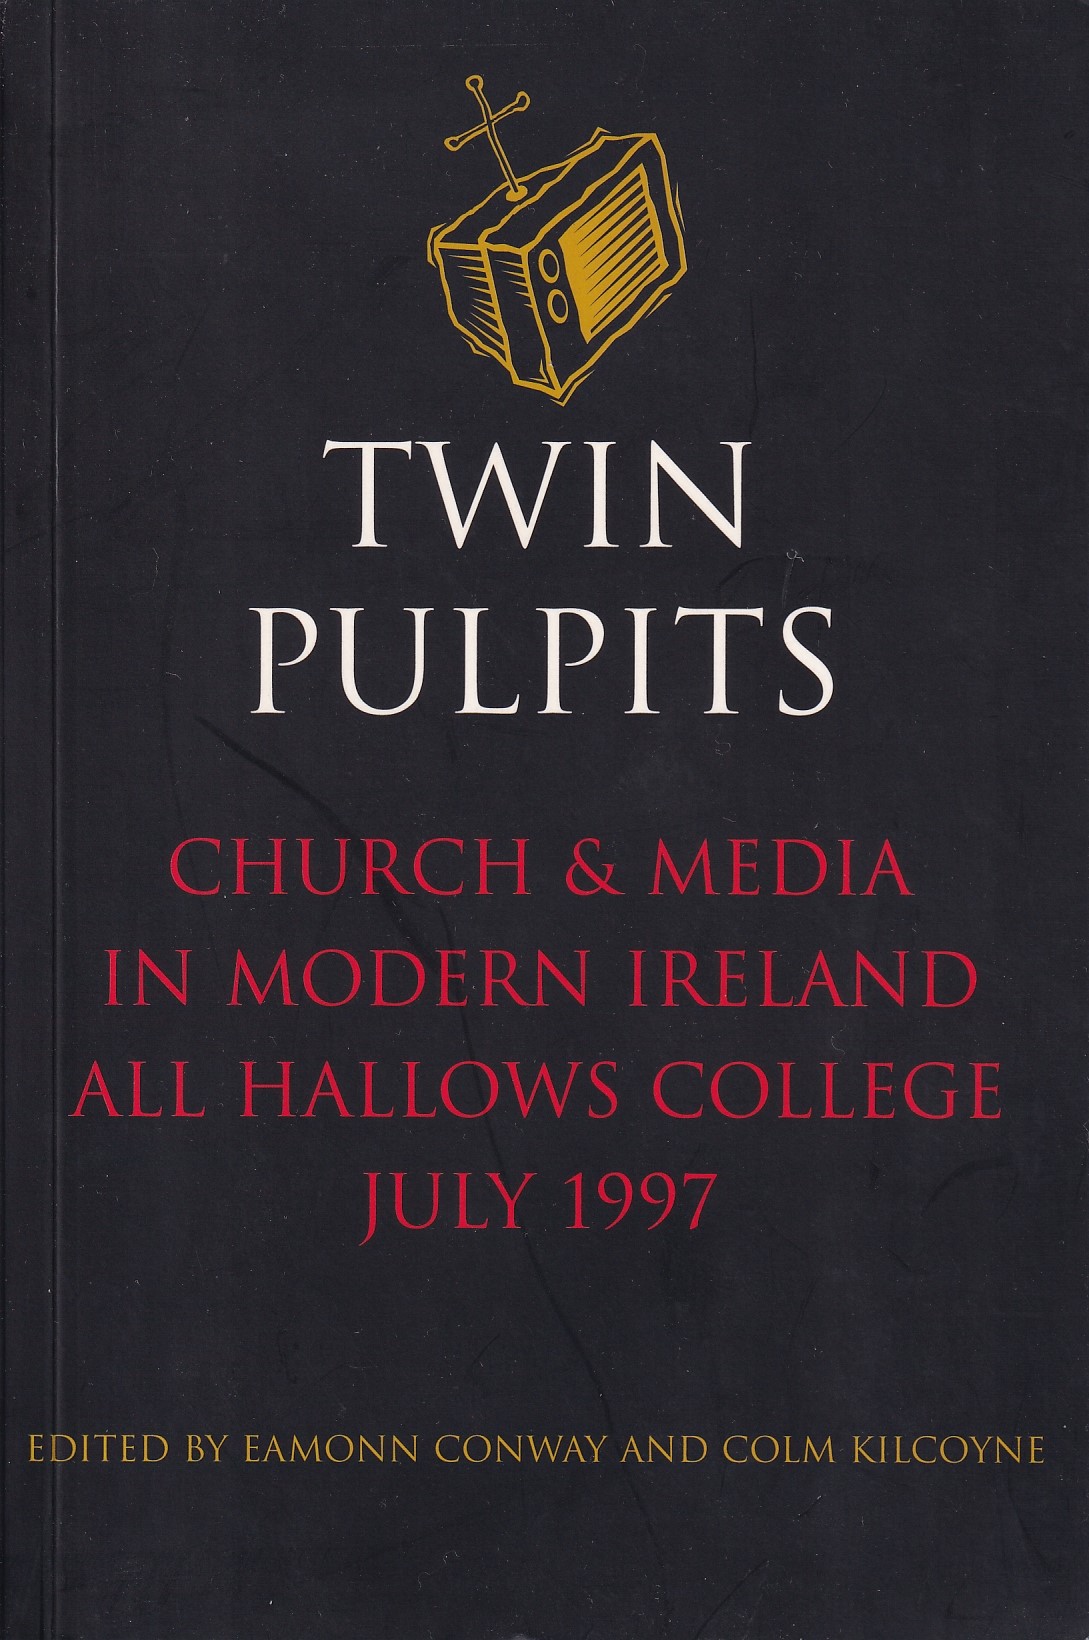 Twin Pulpits: Church and Media in Modern Ireland, All Hallows College, July 1997 by Eamonn Conway & Colm Kilcoyne (eds.)